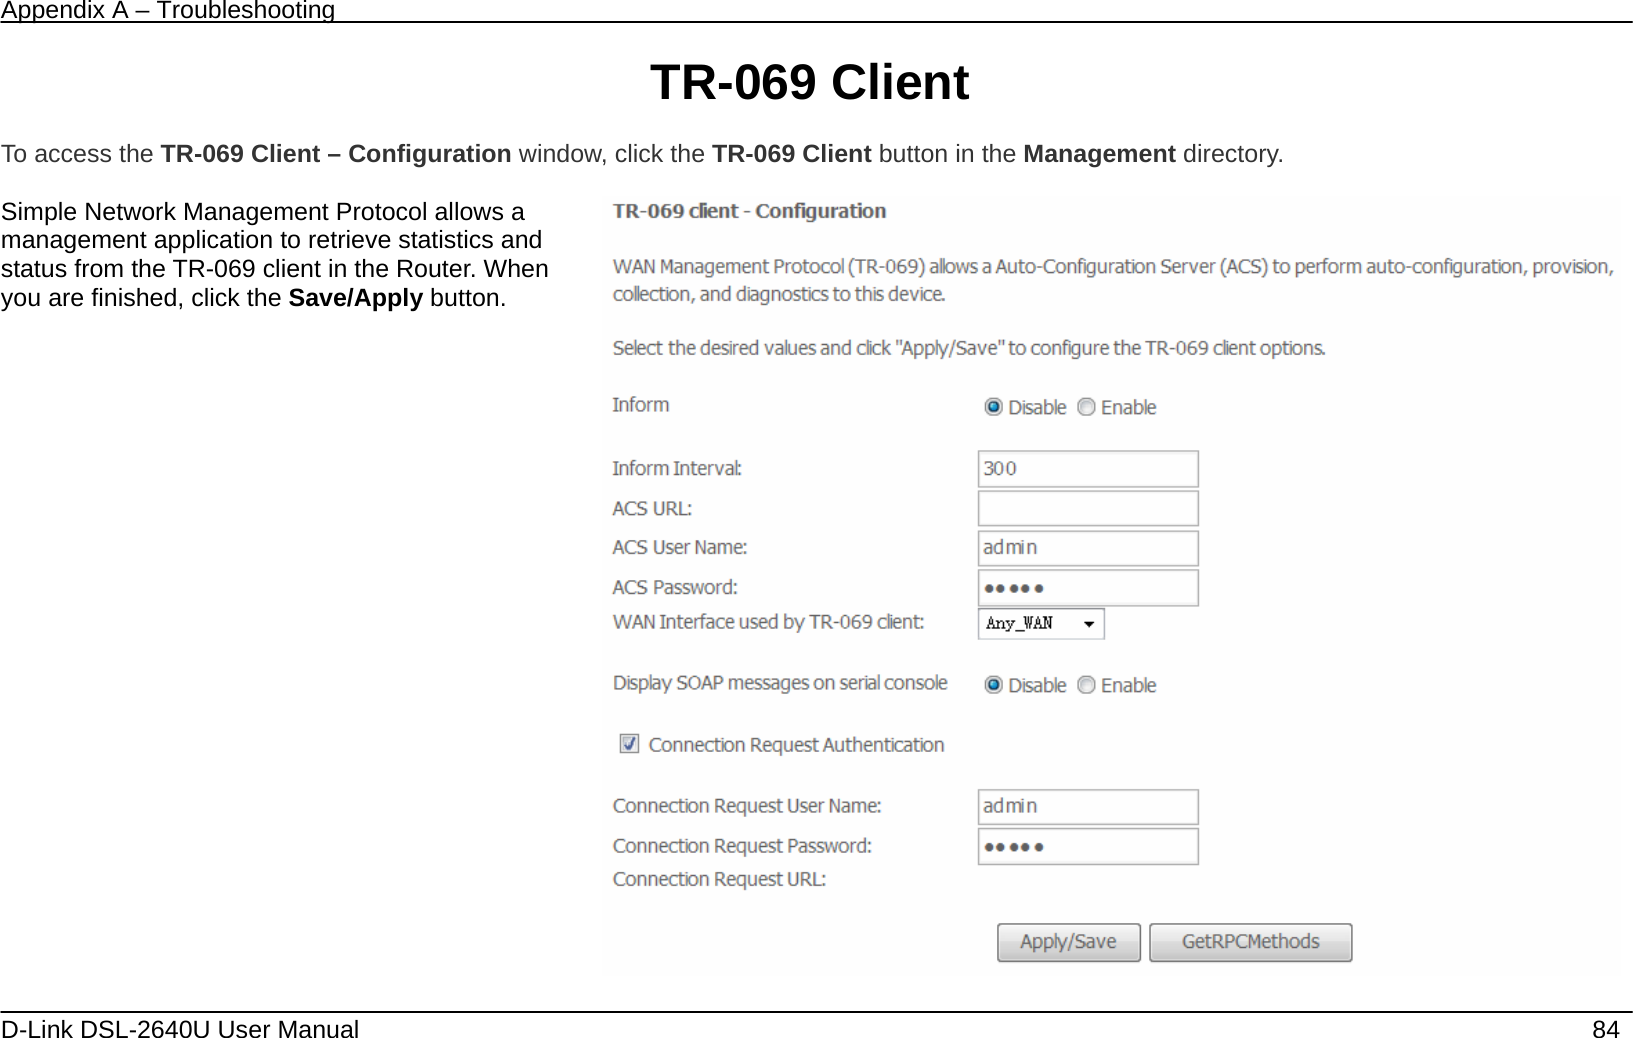 Appendix A – Troubleshooting   D-Link DSL-2640U User Manual    84 TR-069 Client  To access the TR-069 Client – Configuration window, click the TR-069 Client button in the Management directory.  Simple Network Management Protocol allows a management application to retrieve statistics and status from the TR-069 client in the Router. When you are finished, click the Save/Apply button.       